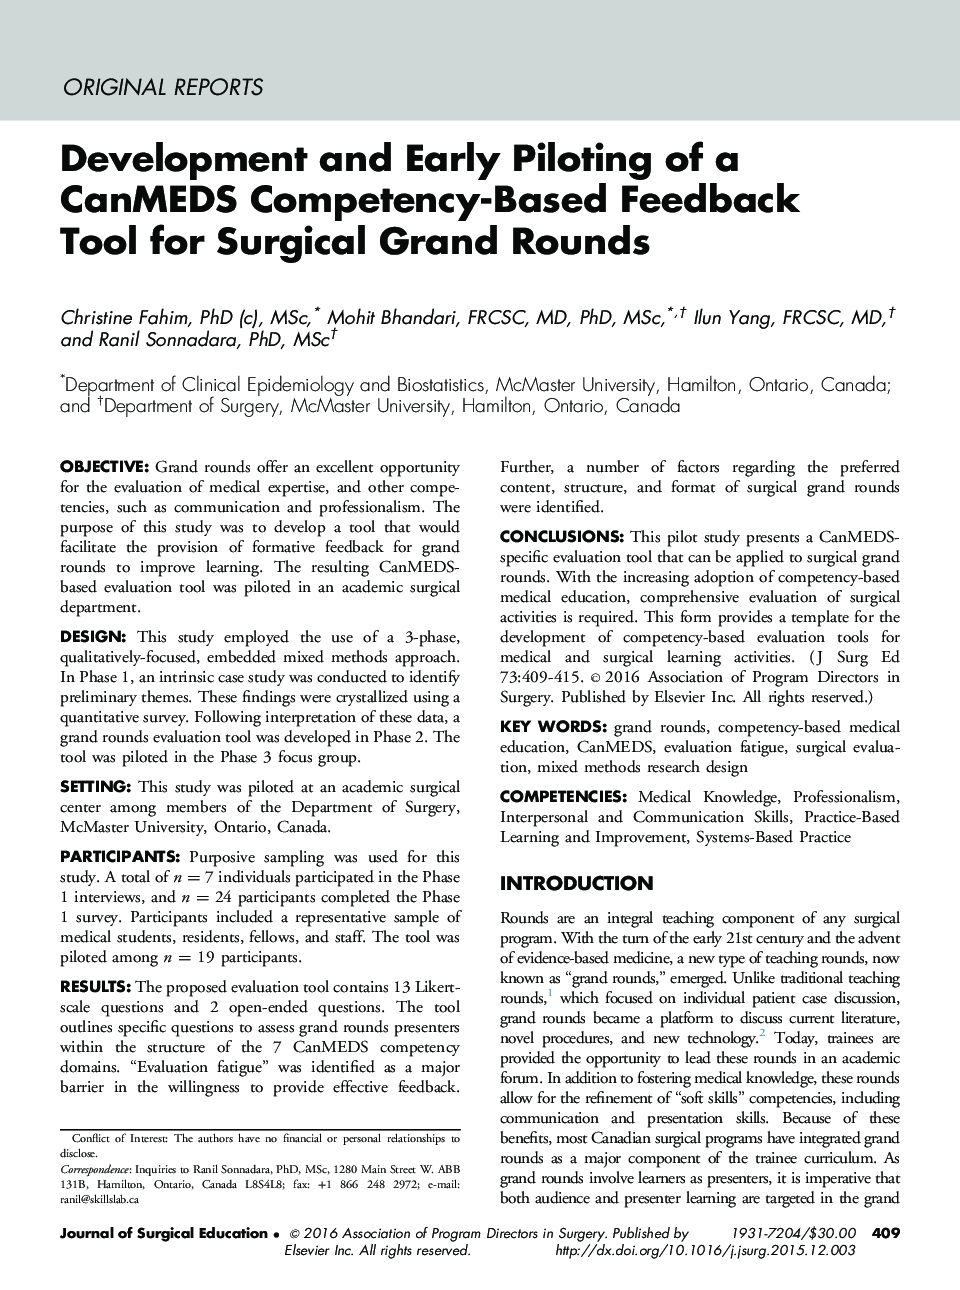 Development and Early Piloting of a CanMEDS Competency-Based Feedback Tool for Surgical Grand Rounds